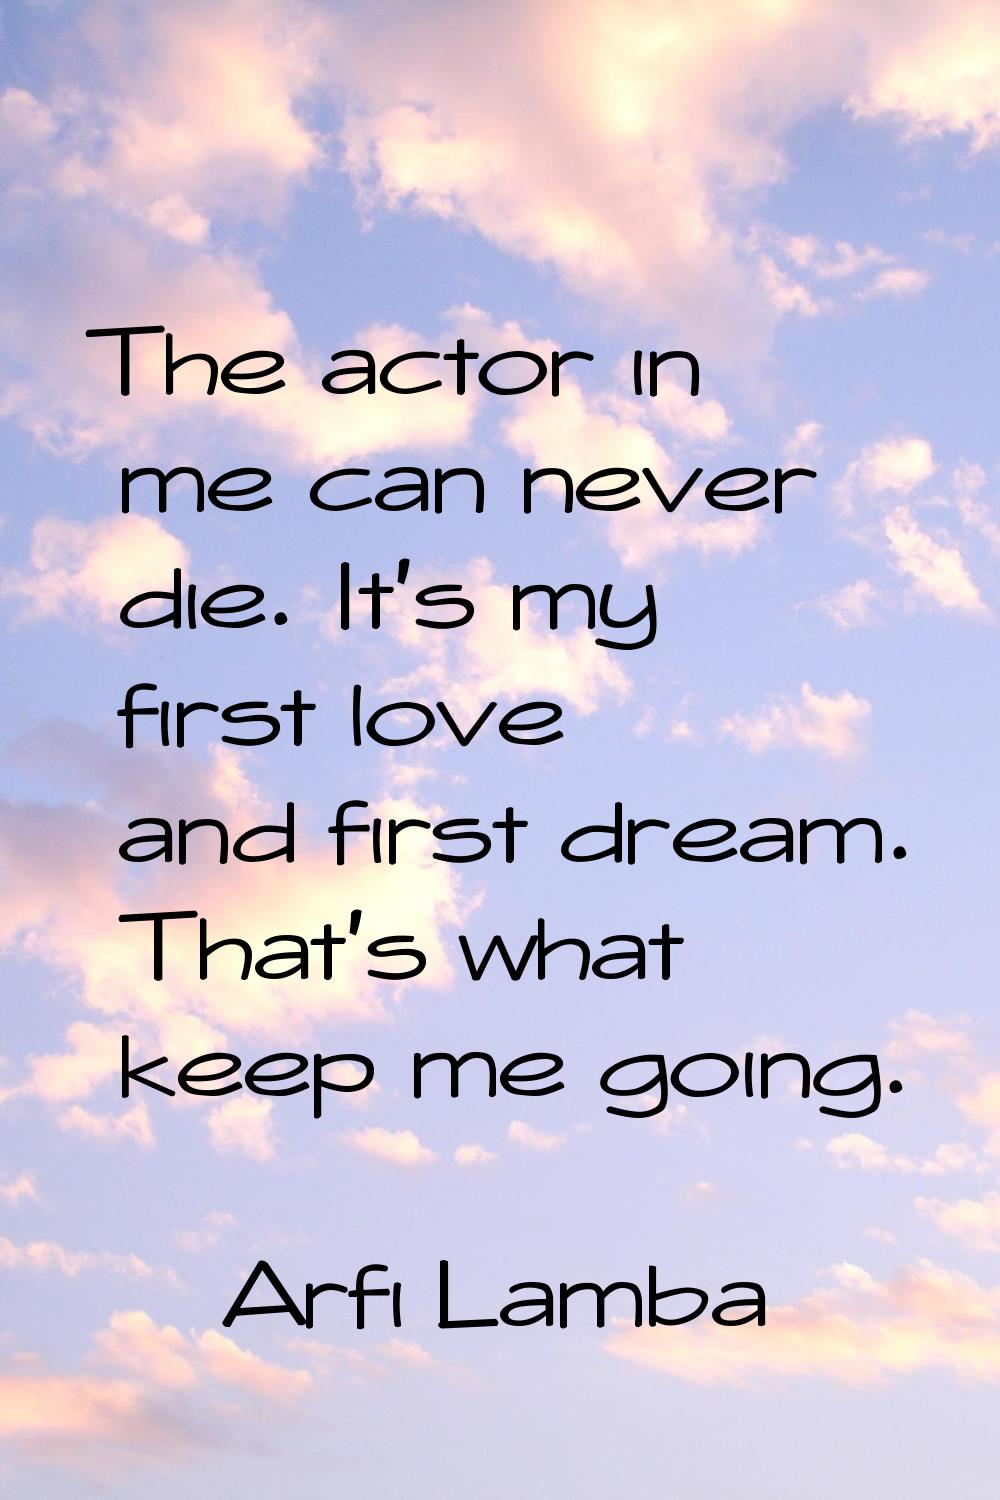 The actor in me can never die. It's my first love and first dream. That's what keep me going.